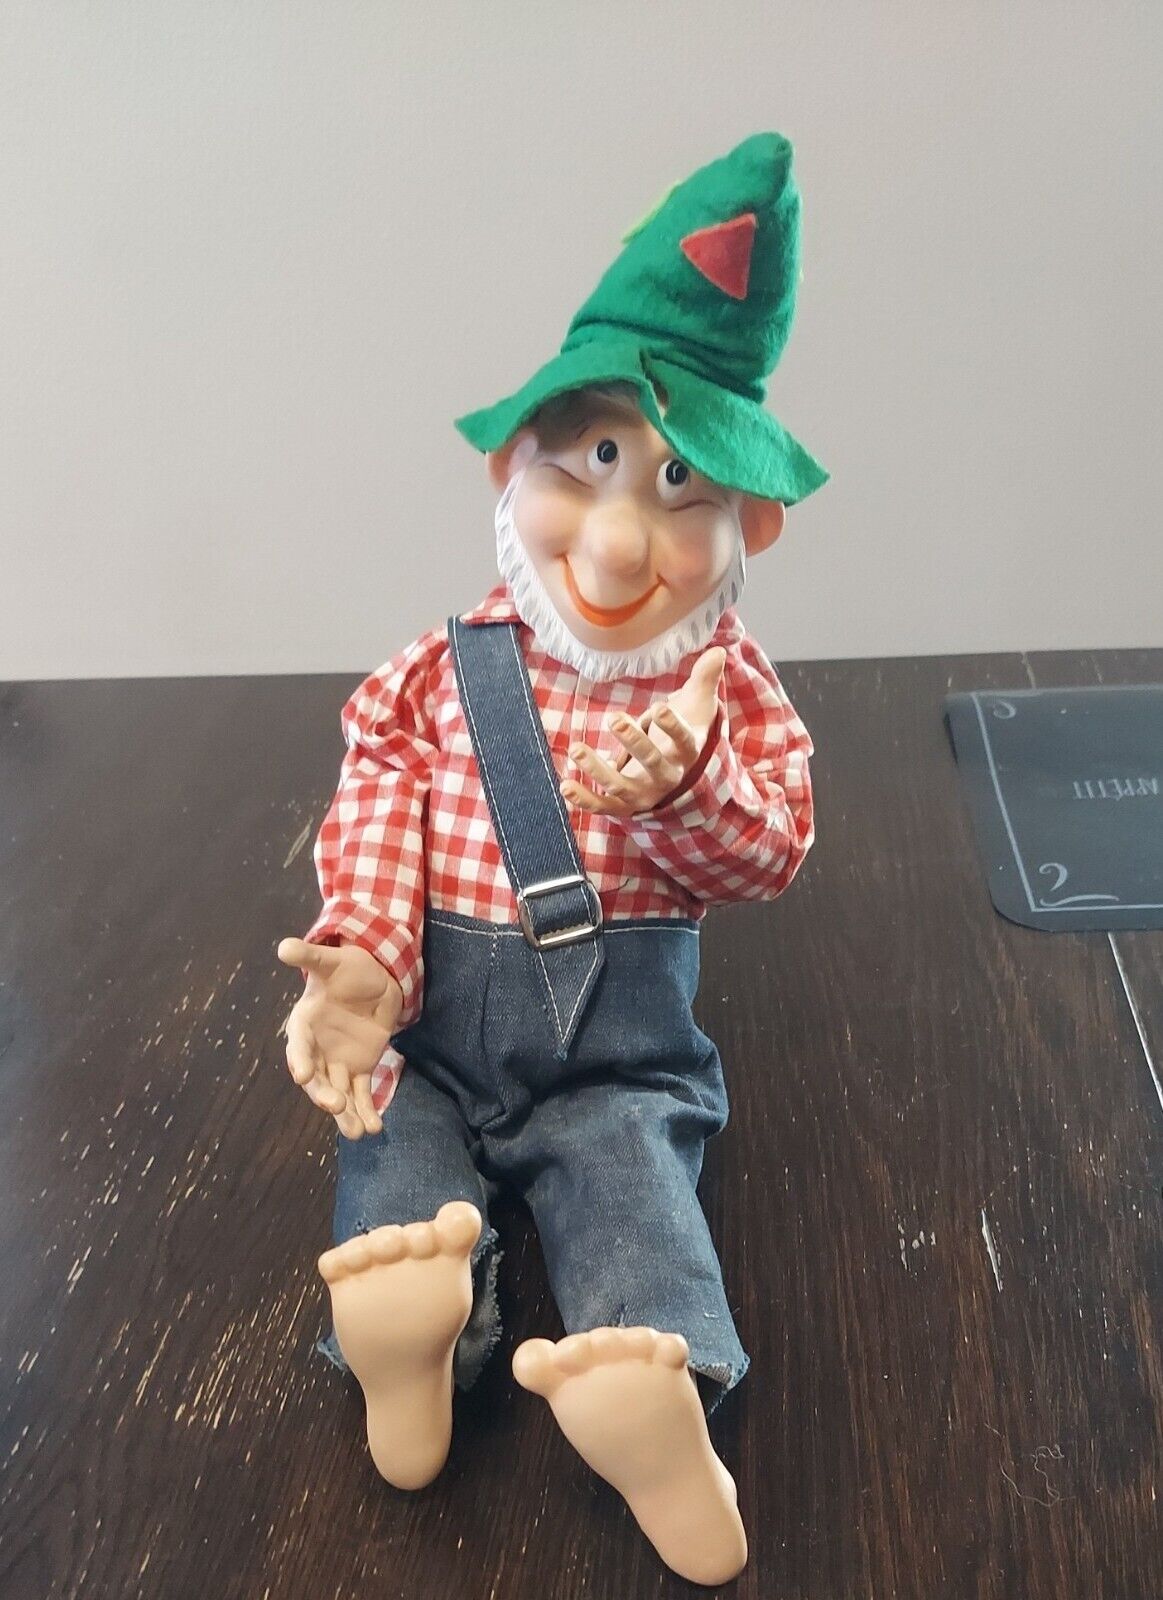 VTG 1960s WILLY THE HILLBILLY Mt. Dew Promotional Doll TICKLE YOUR INNARDS 💚💚